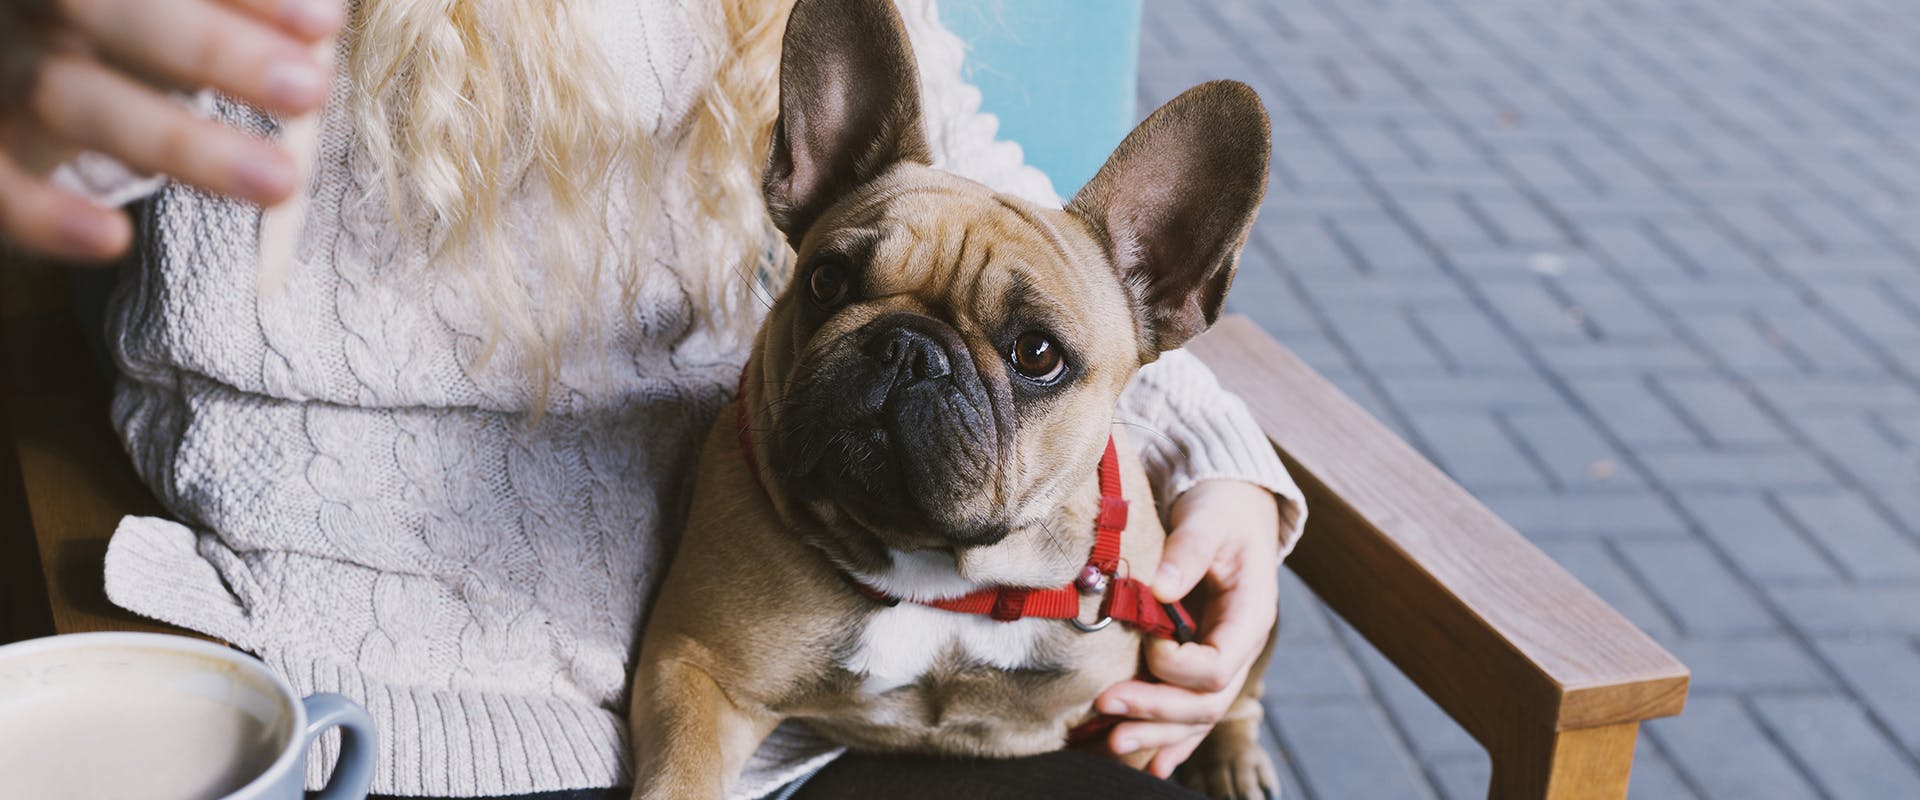 A French Bulldog sitting on the lap of a woman, who is sitting down at a cafe